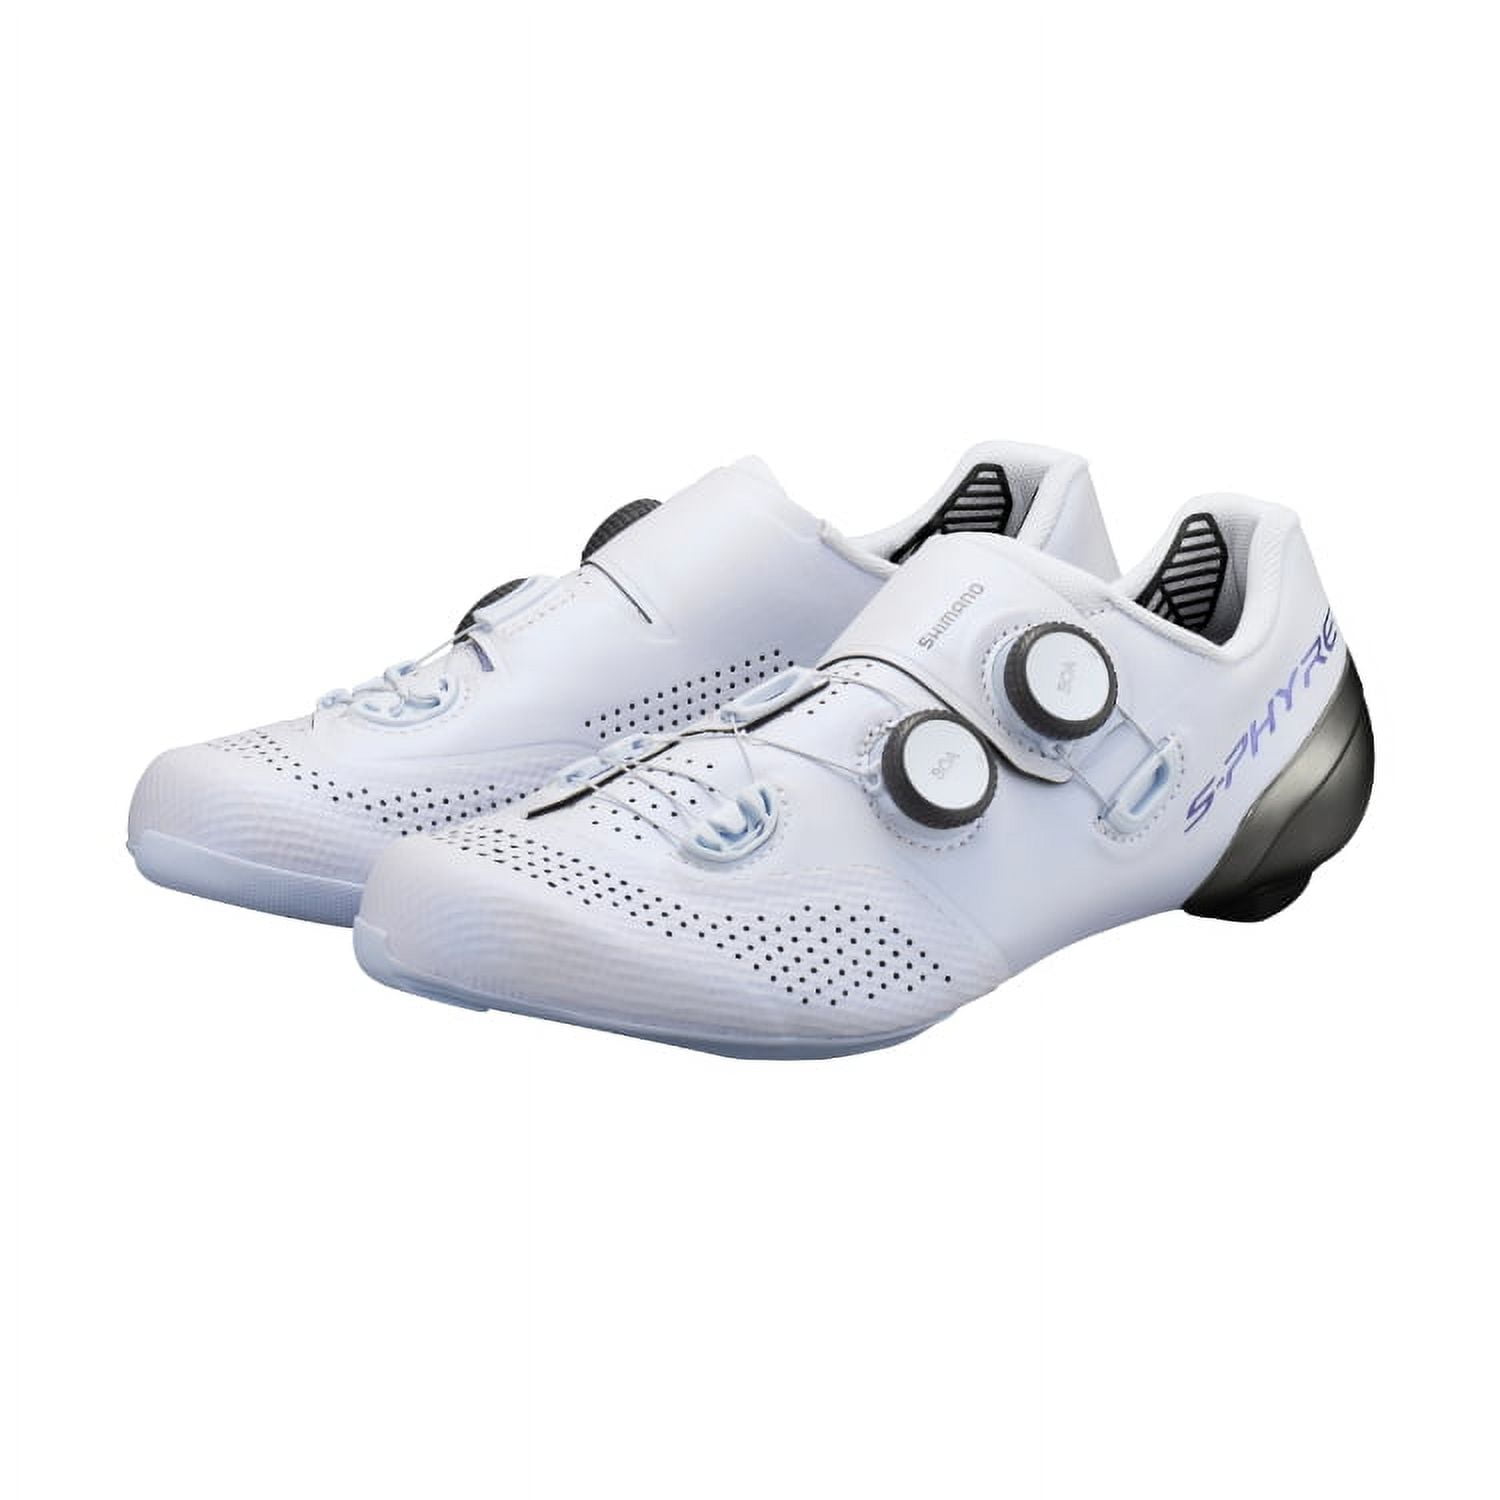 Shimano S-Phyre Carbon Road Cycling Shoes / SH-RC902 / 45.5 WIDE 